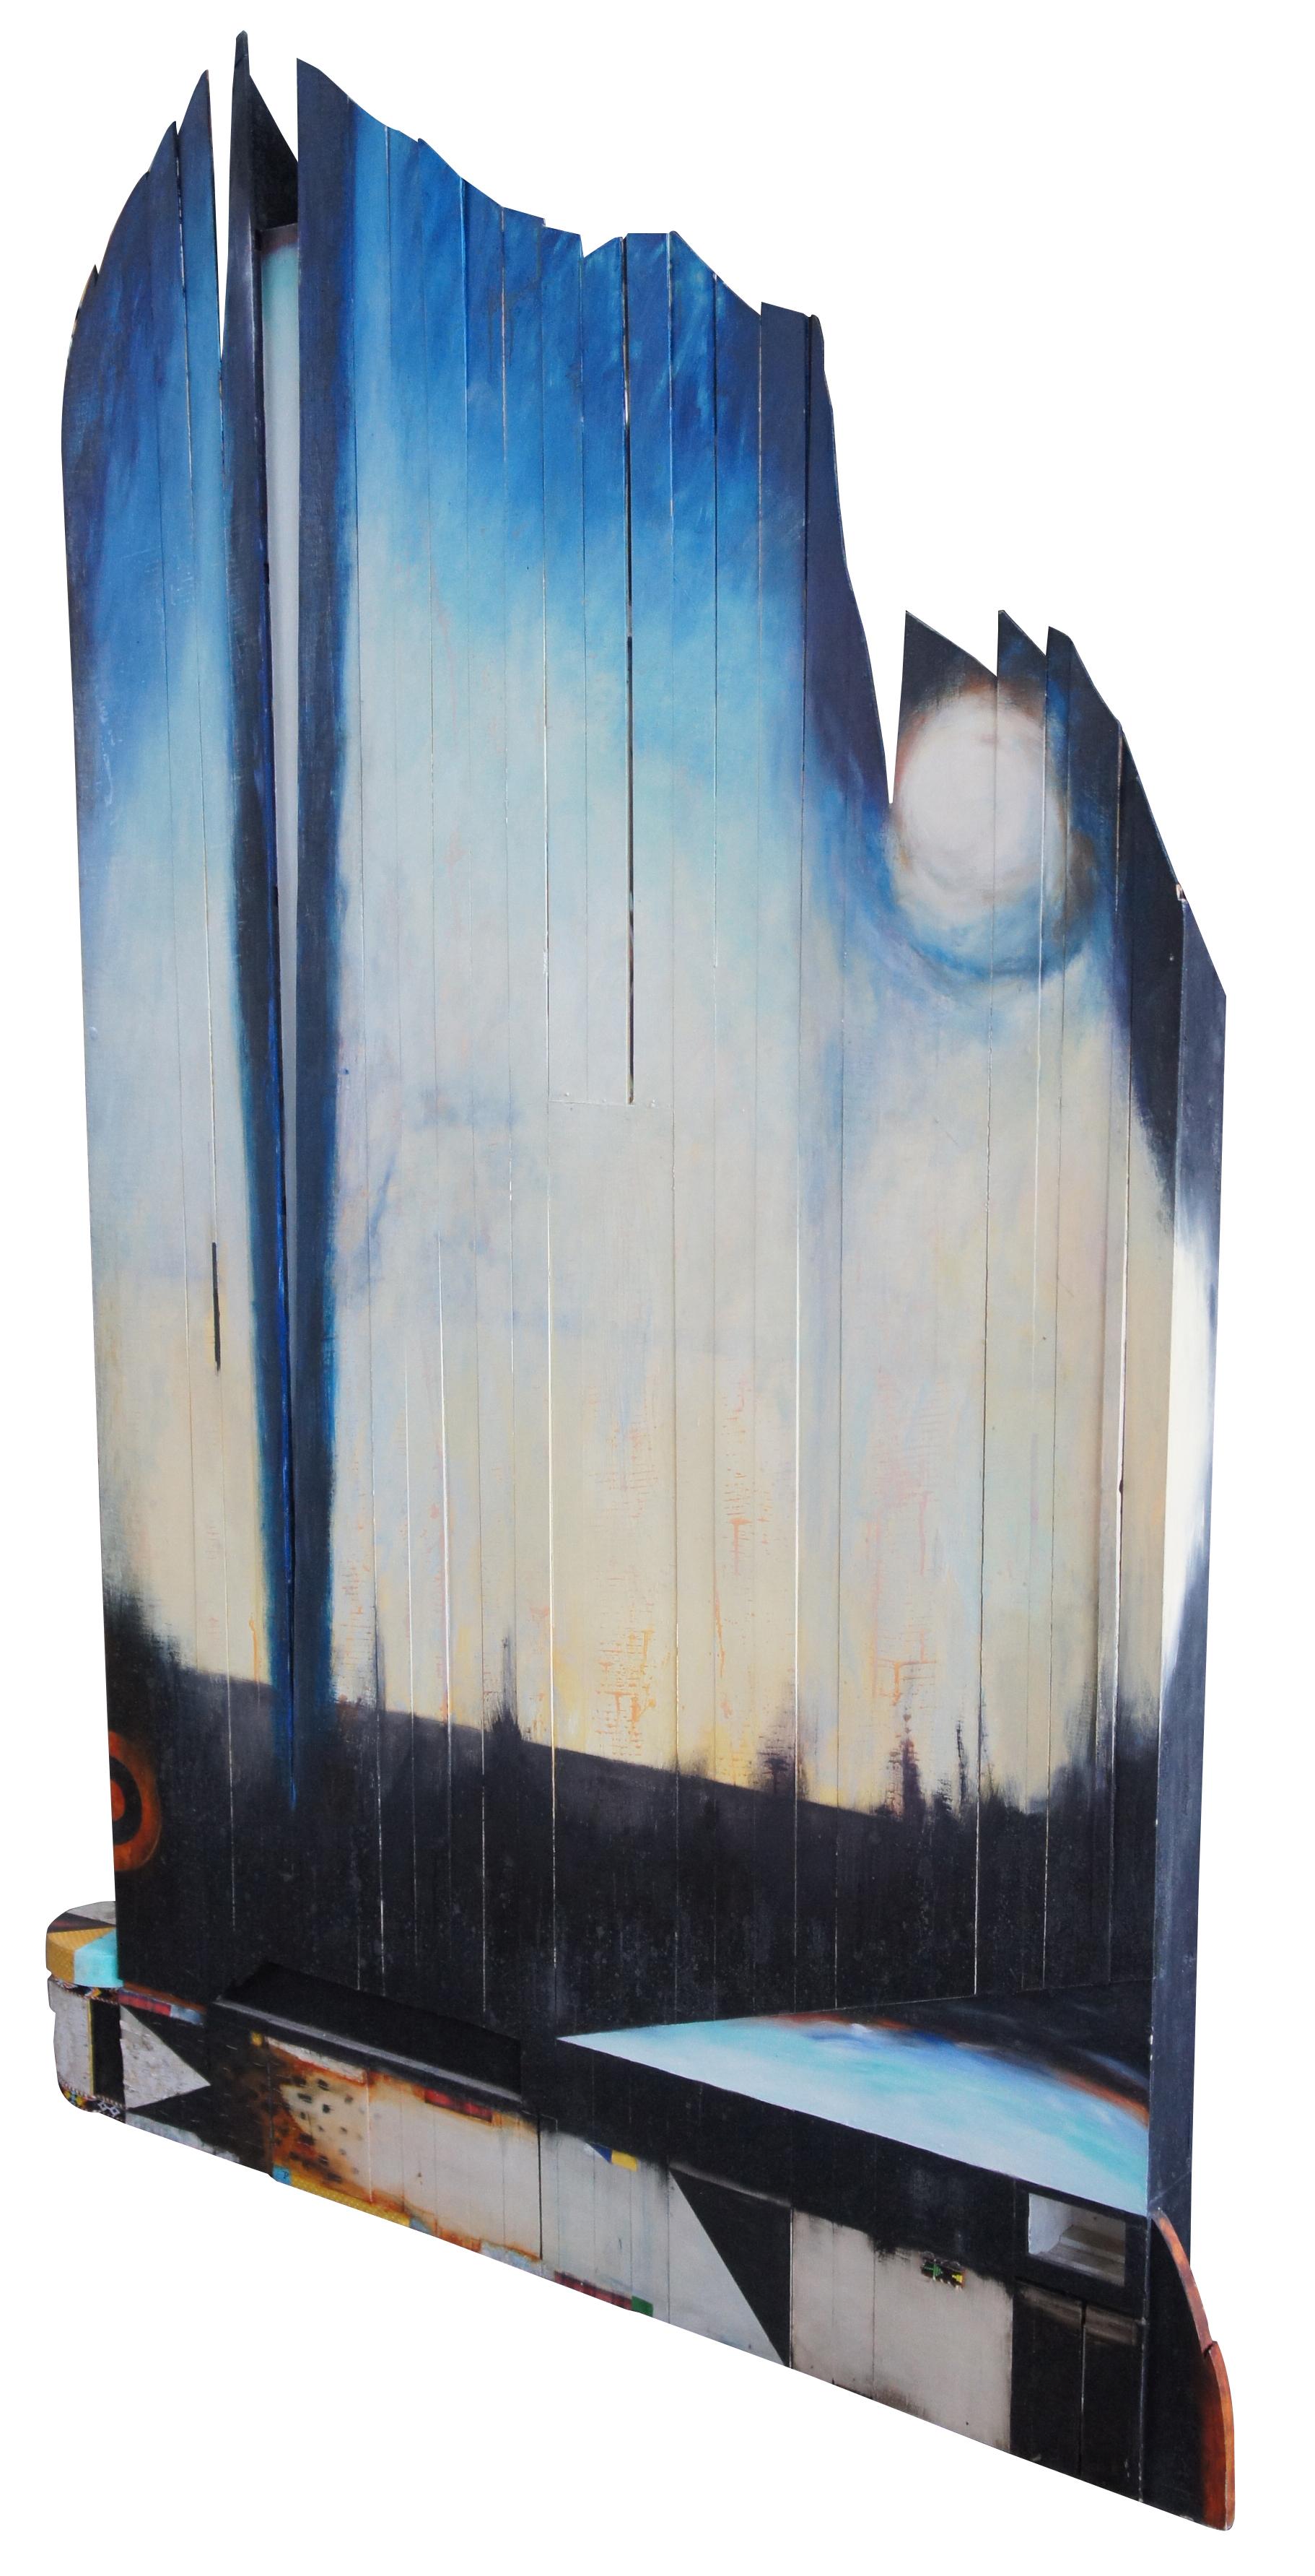 Light coming on the plains by Cameron Zebrun 1987 mixed-media oil on wood panels

Cameron is a Renaissance man inspired by the natural world to create sculpture, photographs, paintings and other objects that often defy such neat categorization.